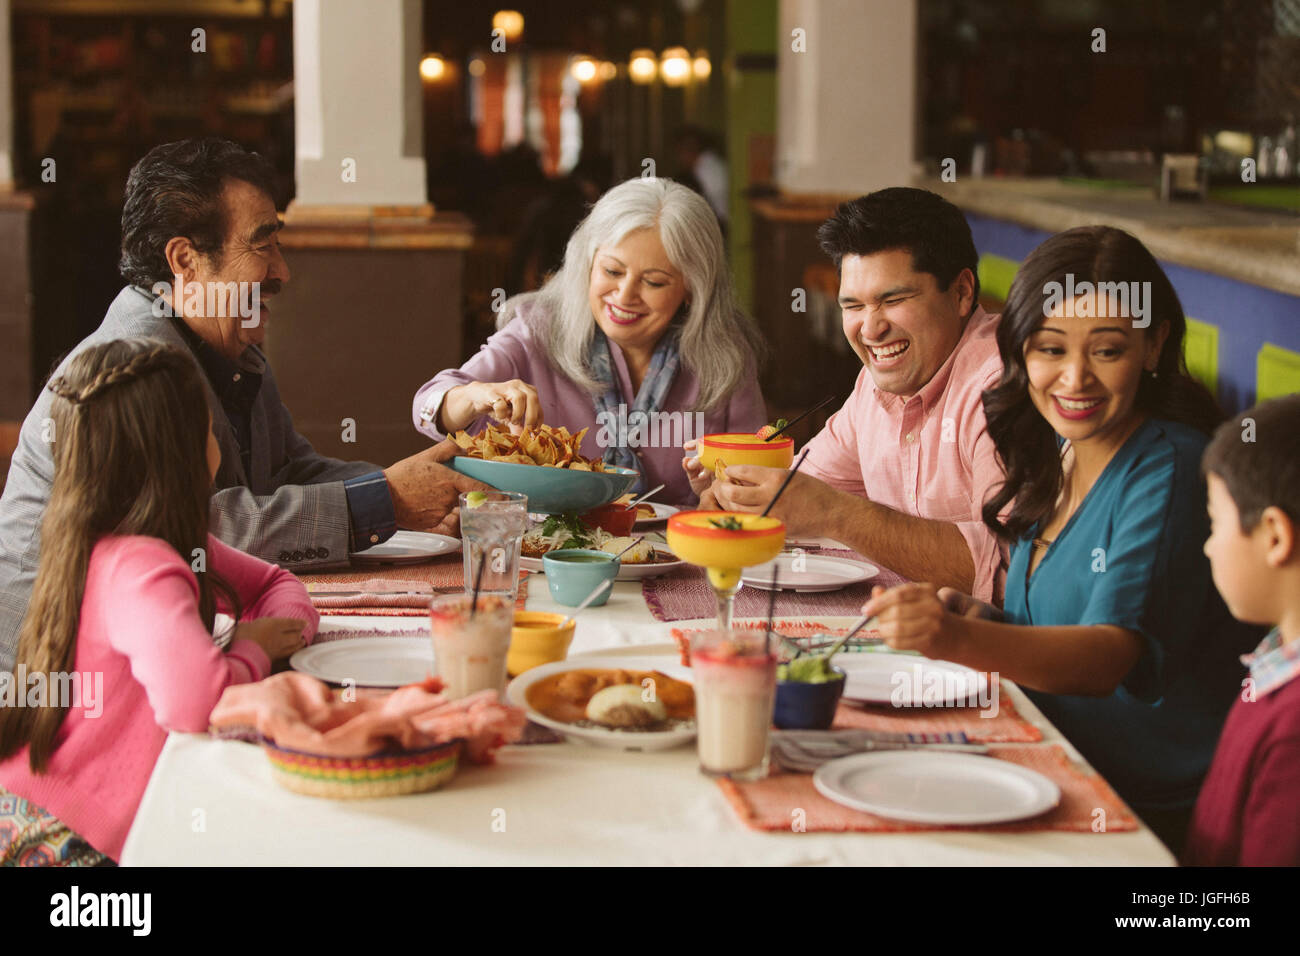 Extended Family Meal High Resolution Stock Photography and Images - Alamy